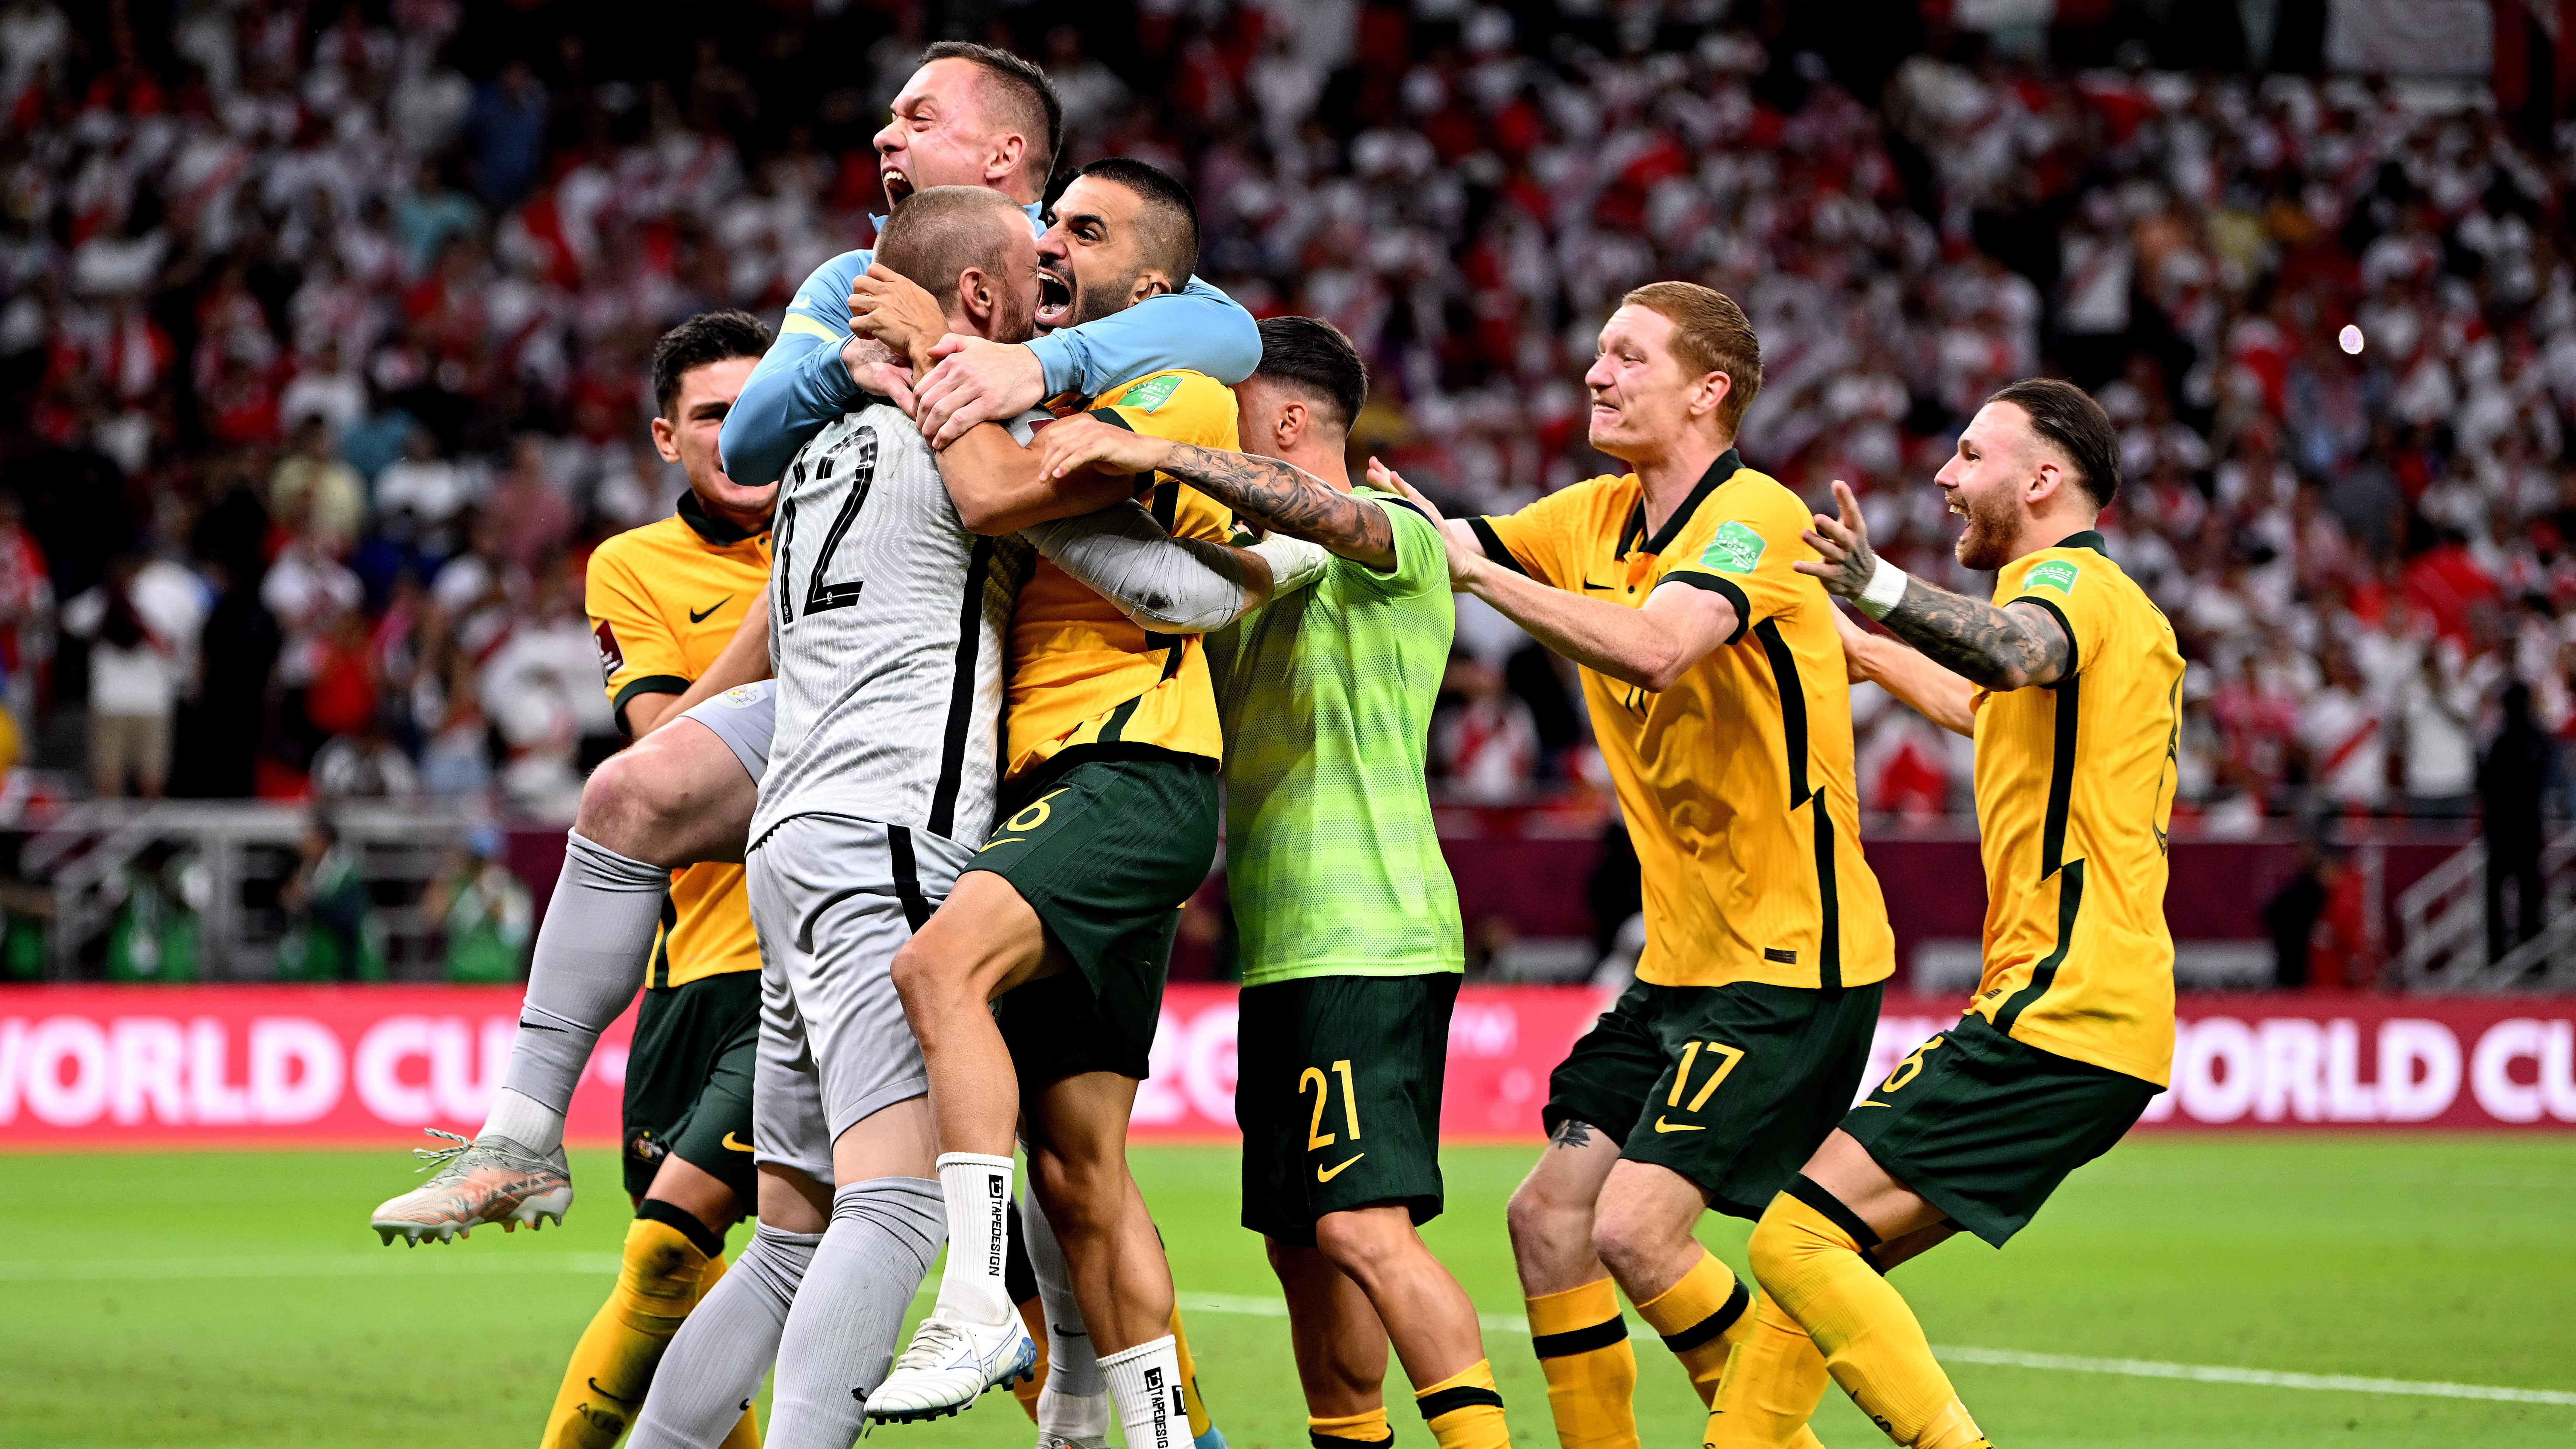 The Socceroos are heading to the World Cup!